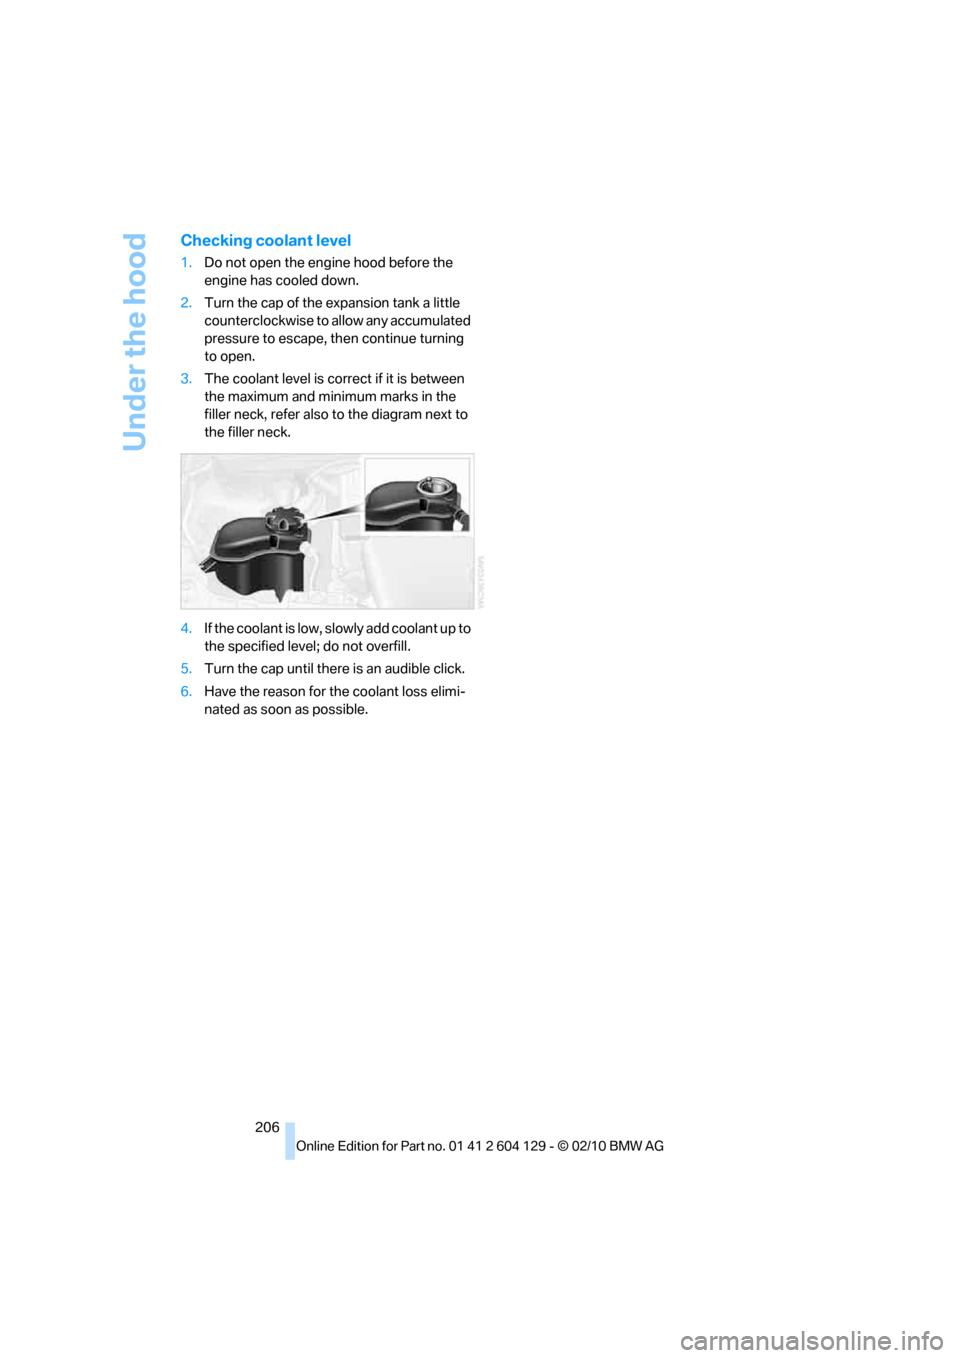 BMW 128I CONVERTIBLE 2011 E88 Owners Manual Under the hood
206
Checking coolant level
1.Do not open the engine hood before the 
engine has cooled down.
2.Turn the cap of the expansion tank a little 
counterclockwise to allow any accumulated 
pr